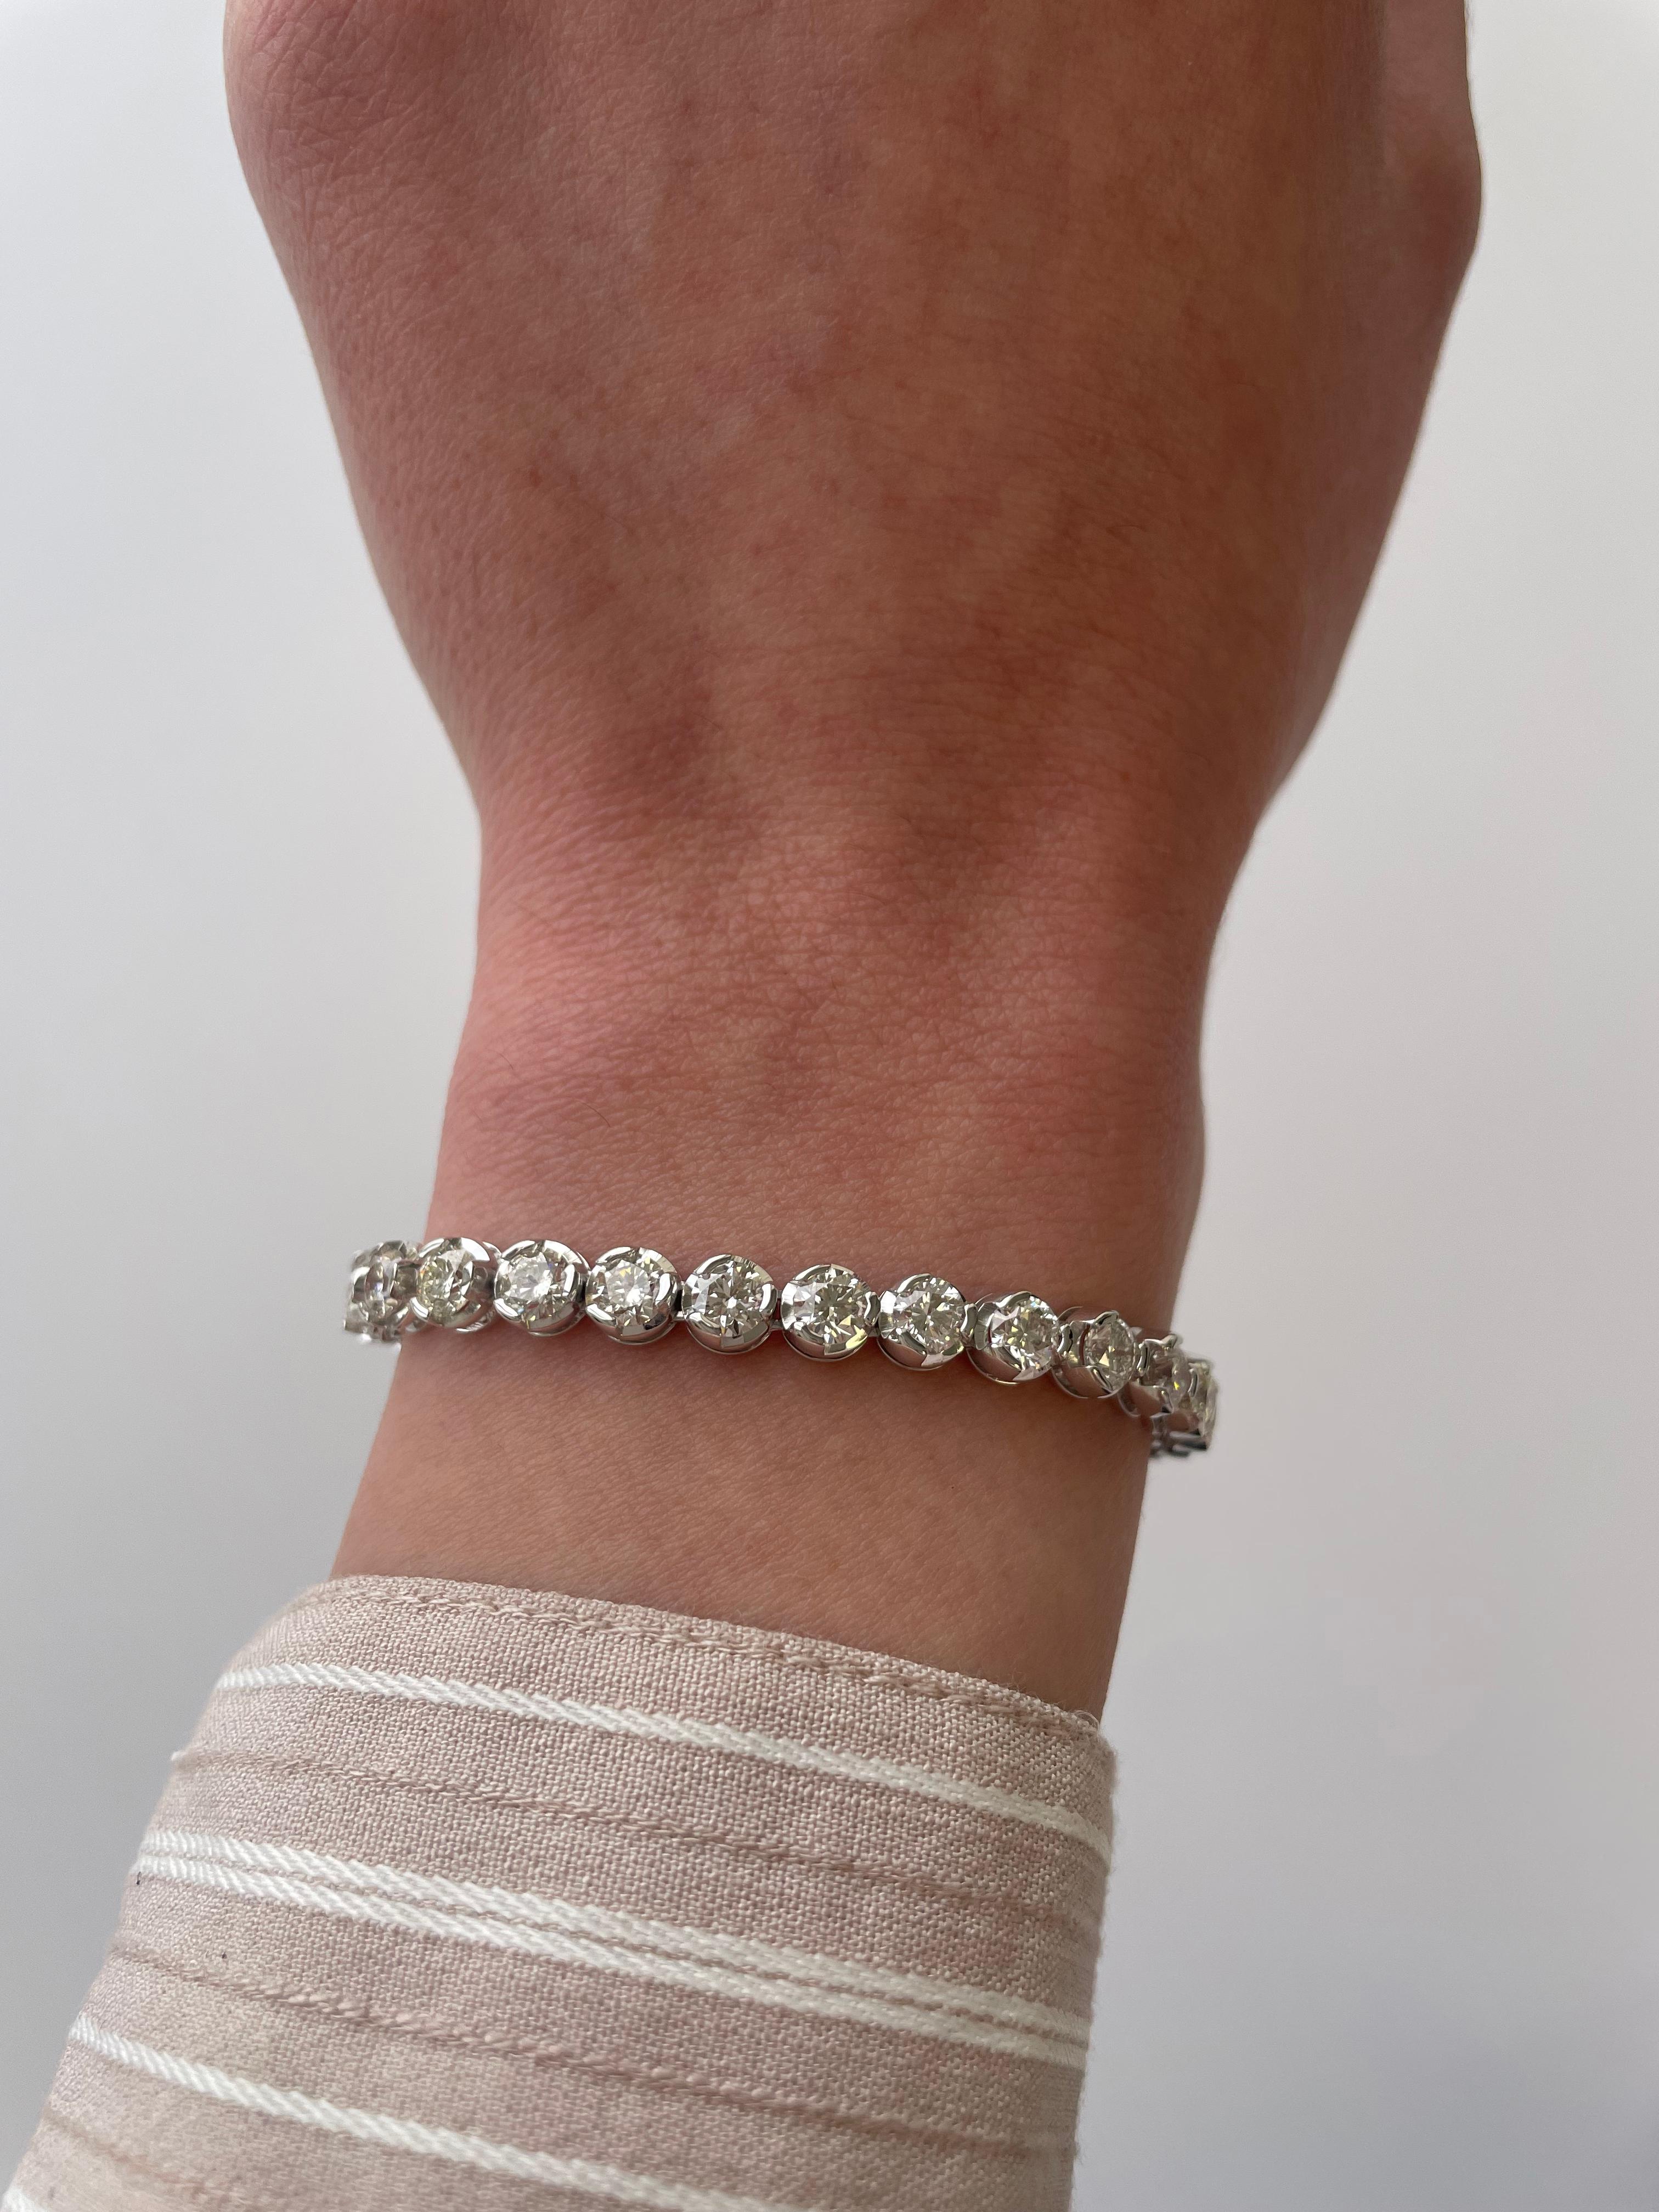 Exquisite and timeless illusion set diamonds tennis bracelet, by Alexander Beverly Hills.
33 round brilliant diamonds, 10.14 carats total. Approximately G/H color and VS clarity. Four prong set in 18k white gold, 16.42 grams, 7.25 inches.